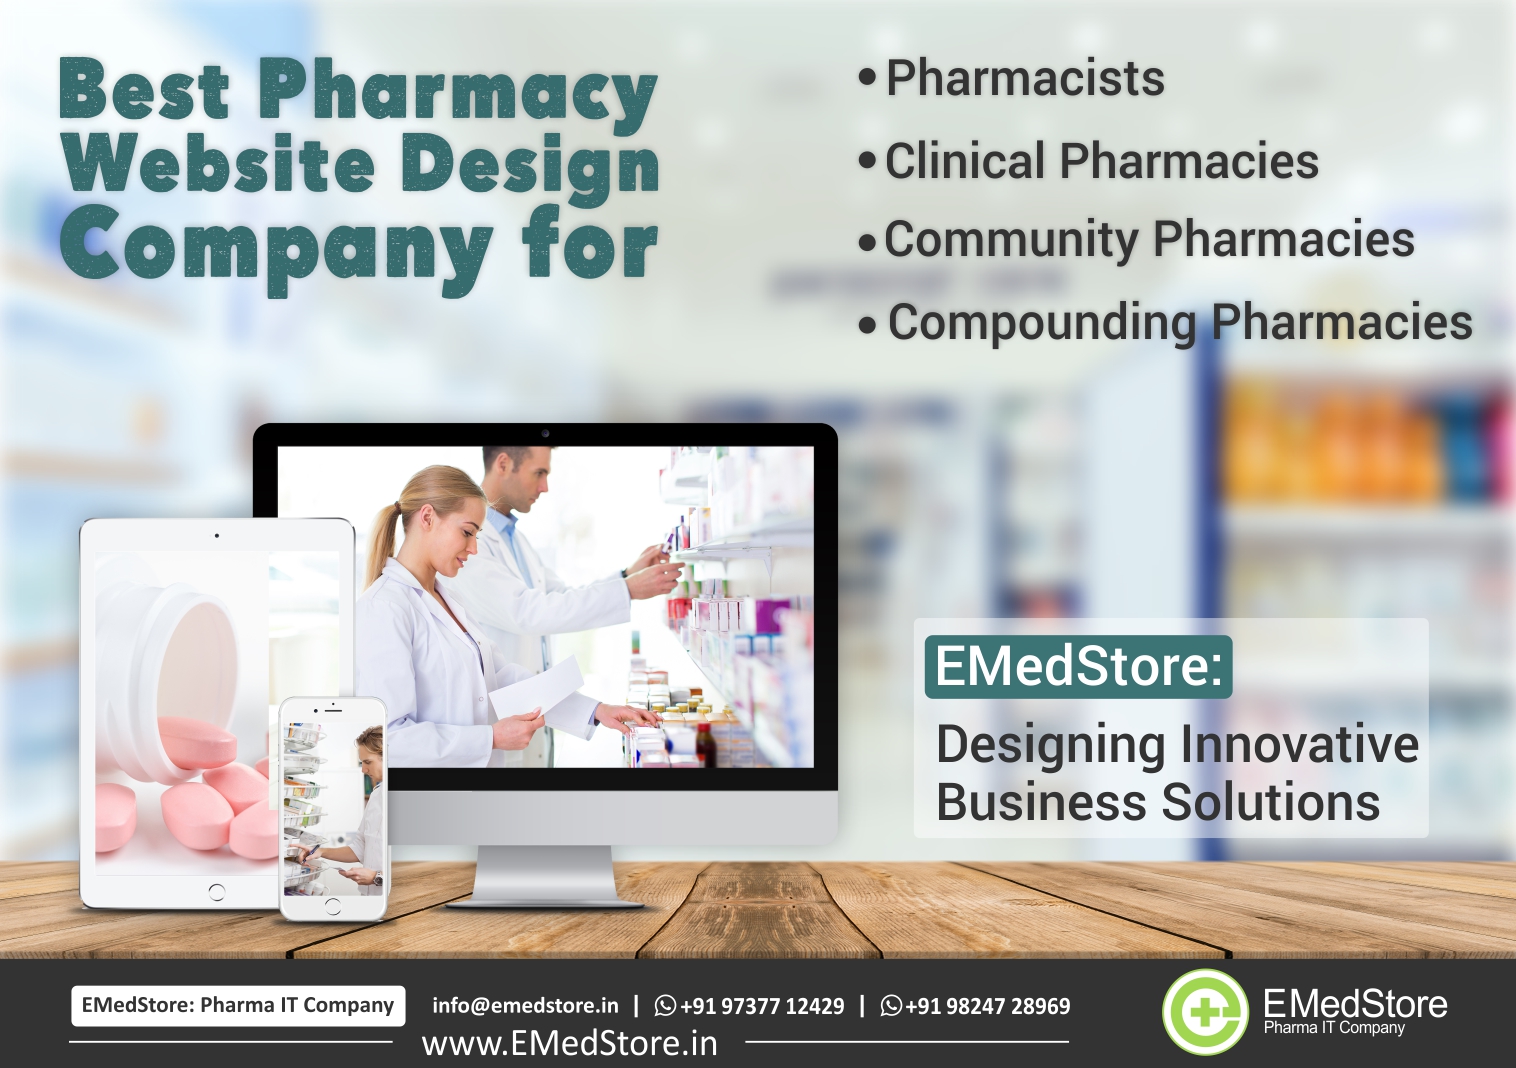 Best Pharmacy Website Design Company For Clinical Community Compounding Pharmacies